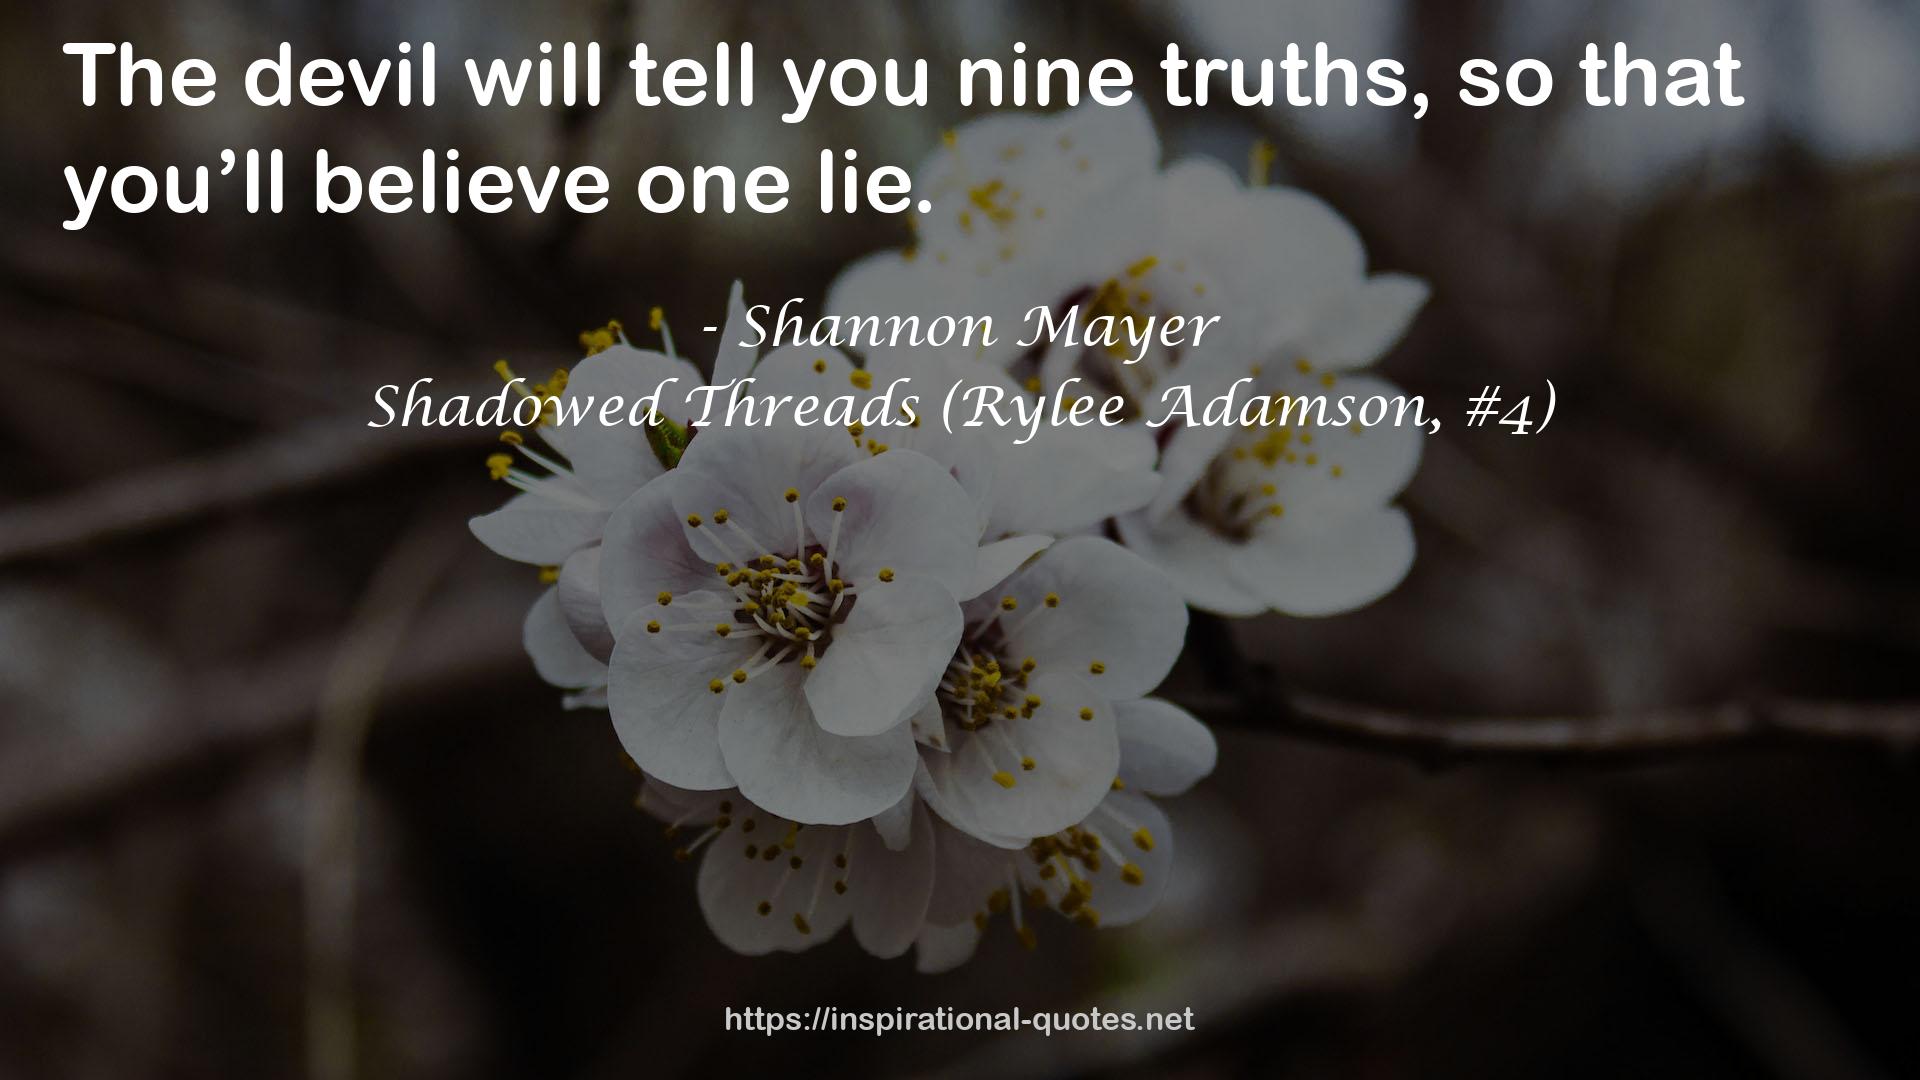 Shadowed Threads (Rylee Adamson, #4) QUOTES